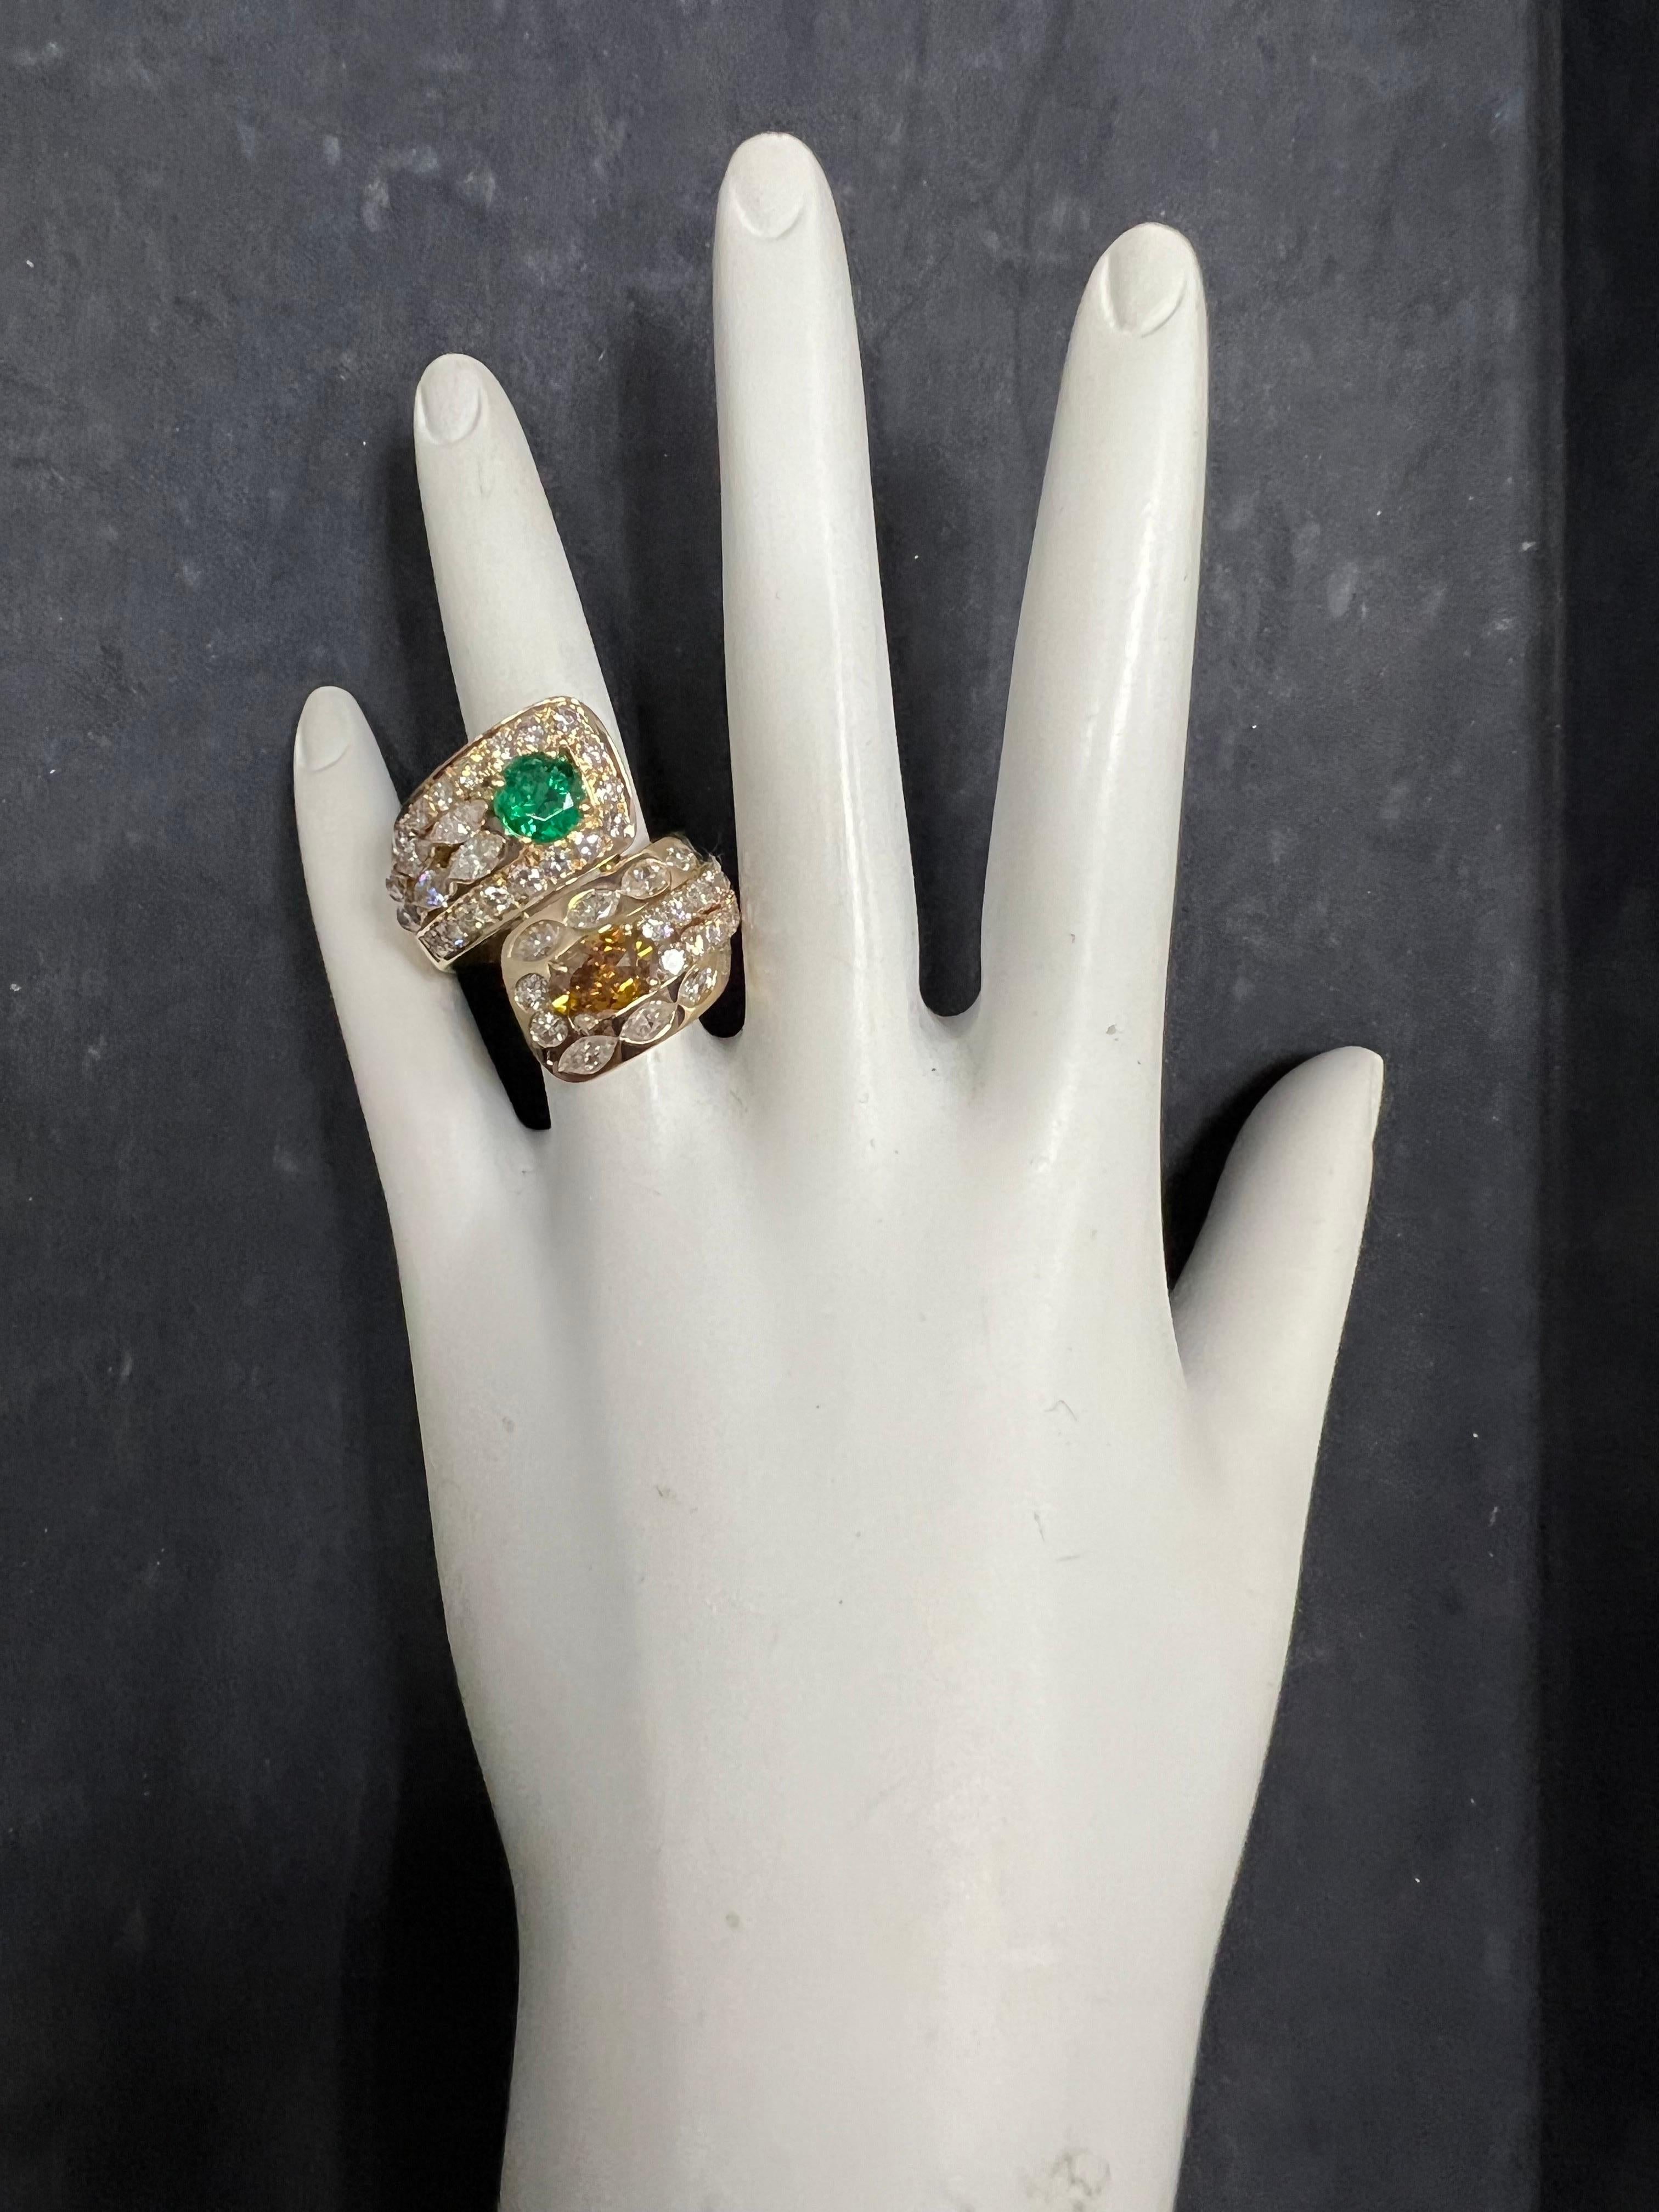 Retro 18k Yellow Gold GIA Certified 7.4 Approximate Carat Natural Emerald & Diamond Cocktail Ring 1960.

The Ring is with two Natural GIA Certified gems. The first is a natural 1.01 carat oval brilliant Fancy Deep Brownish Orangy Yellow